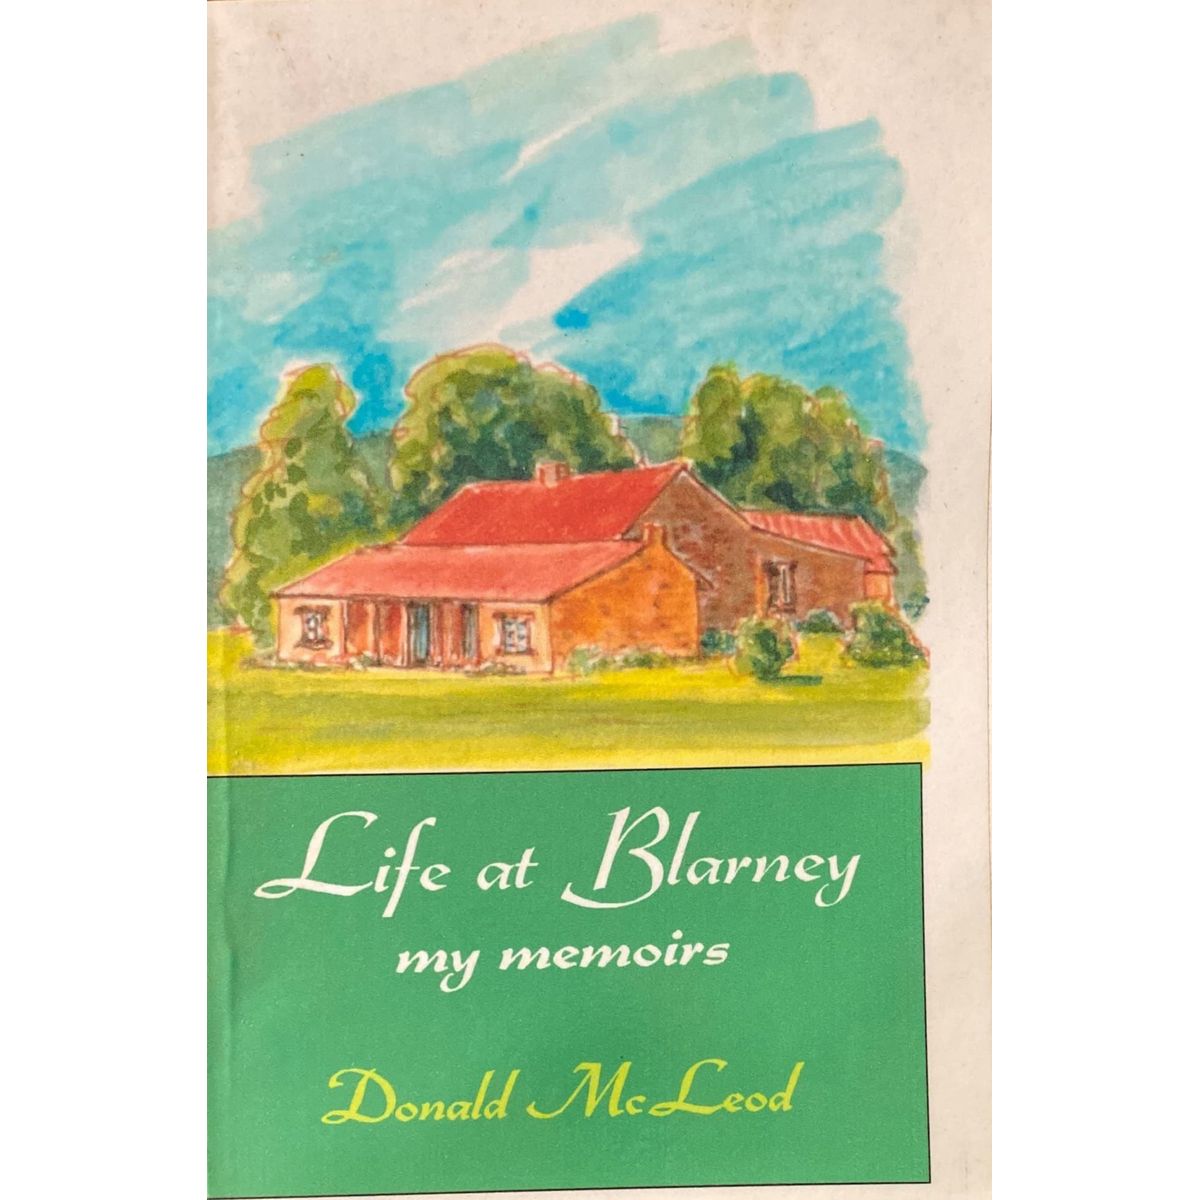 ISBN: 9781869005481 / 1869005481 - Life at Blarney: My Memoirs by Donald McLeod [2004]